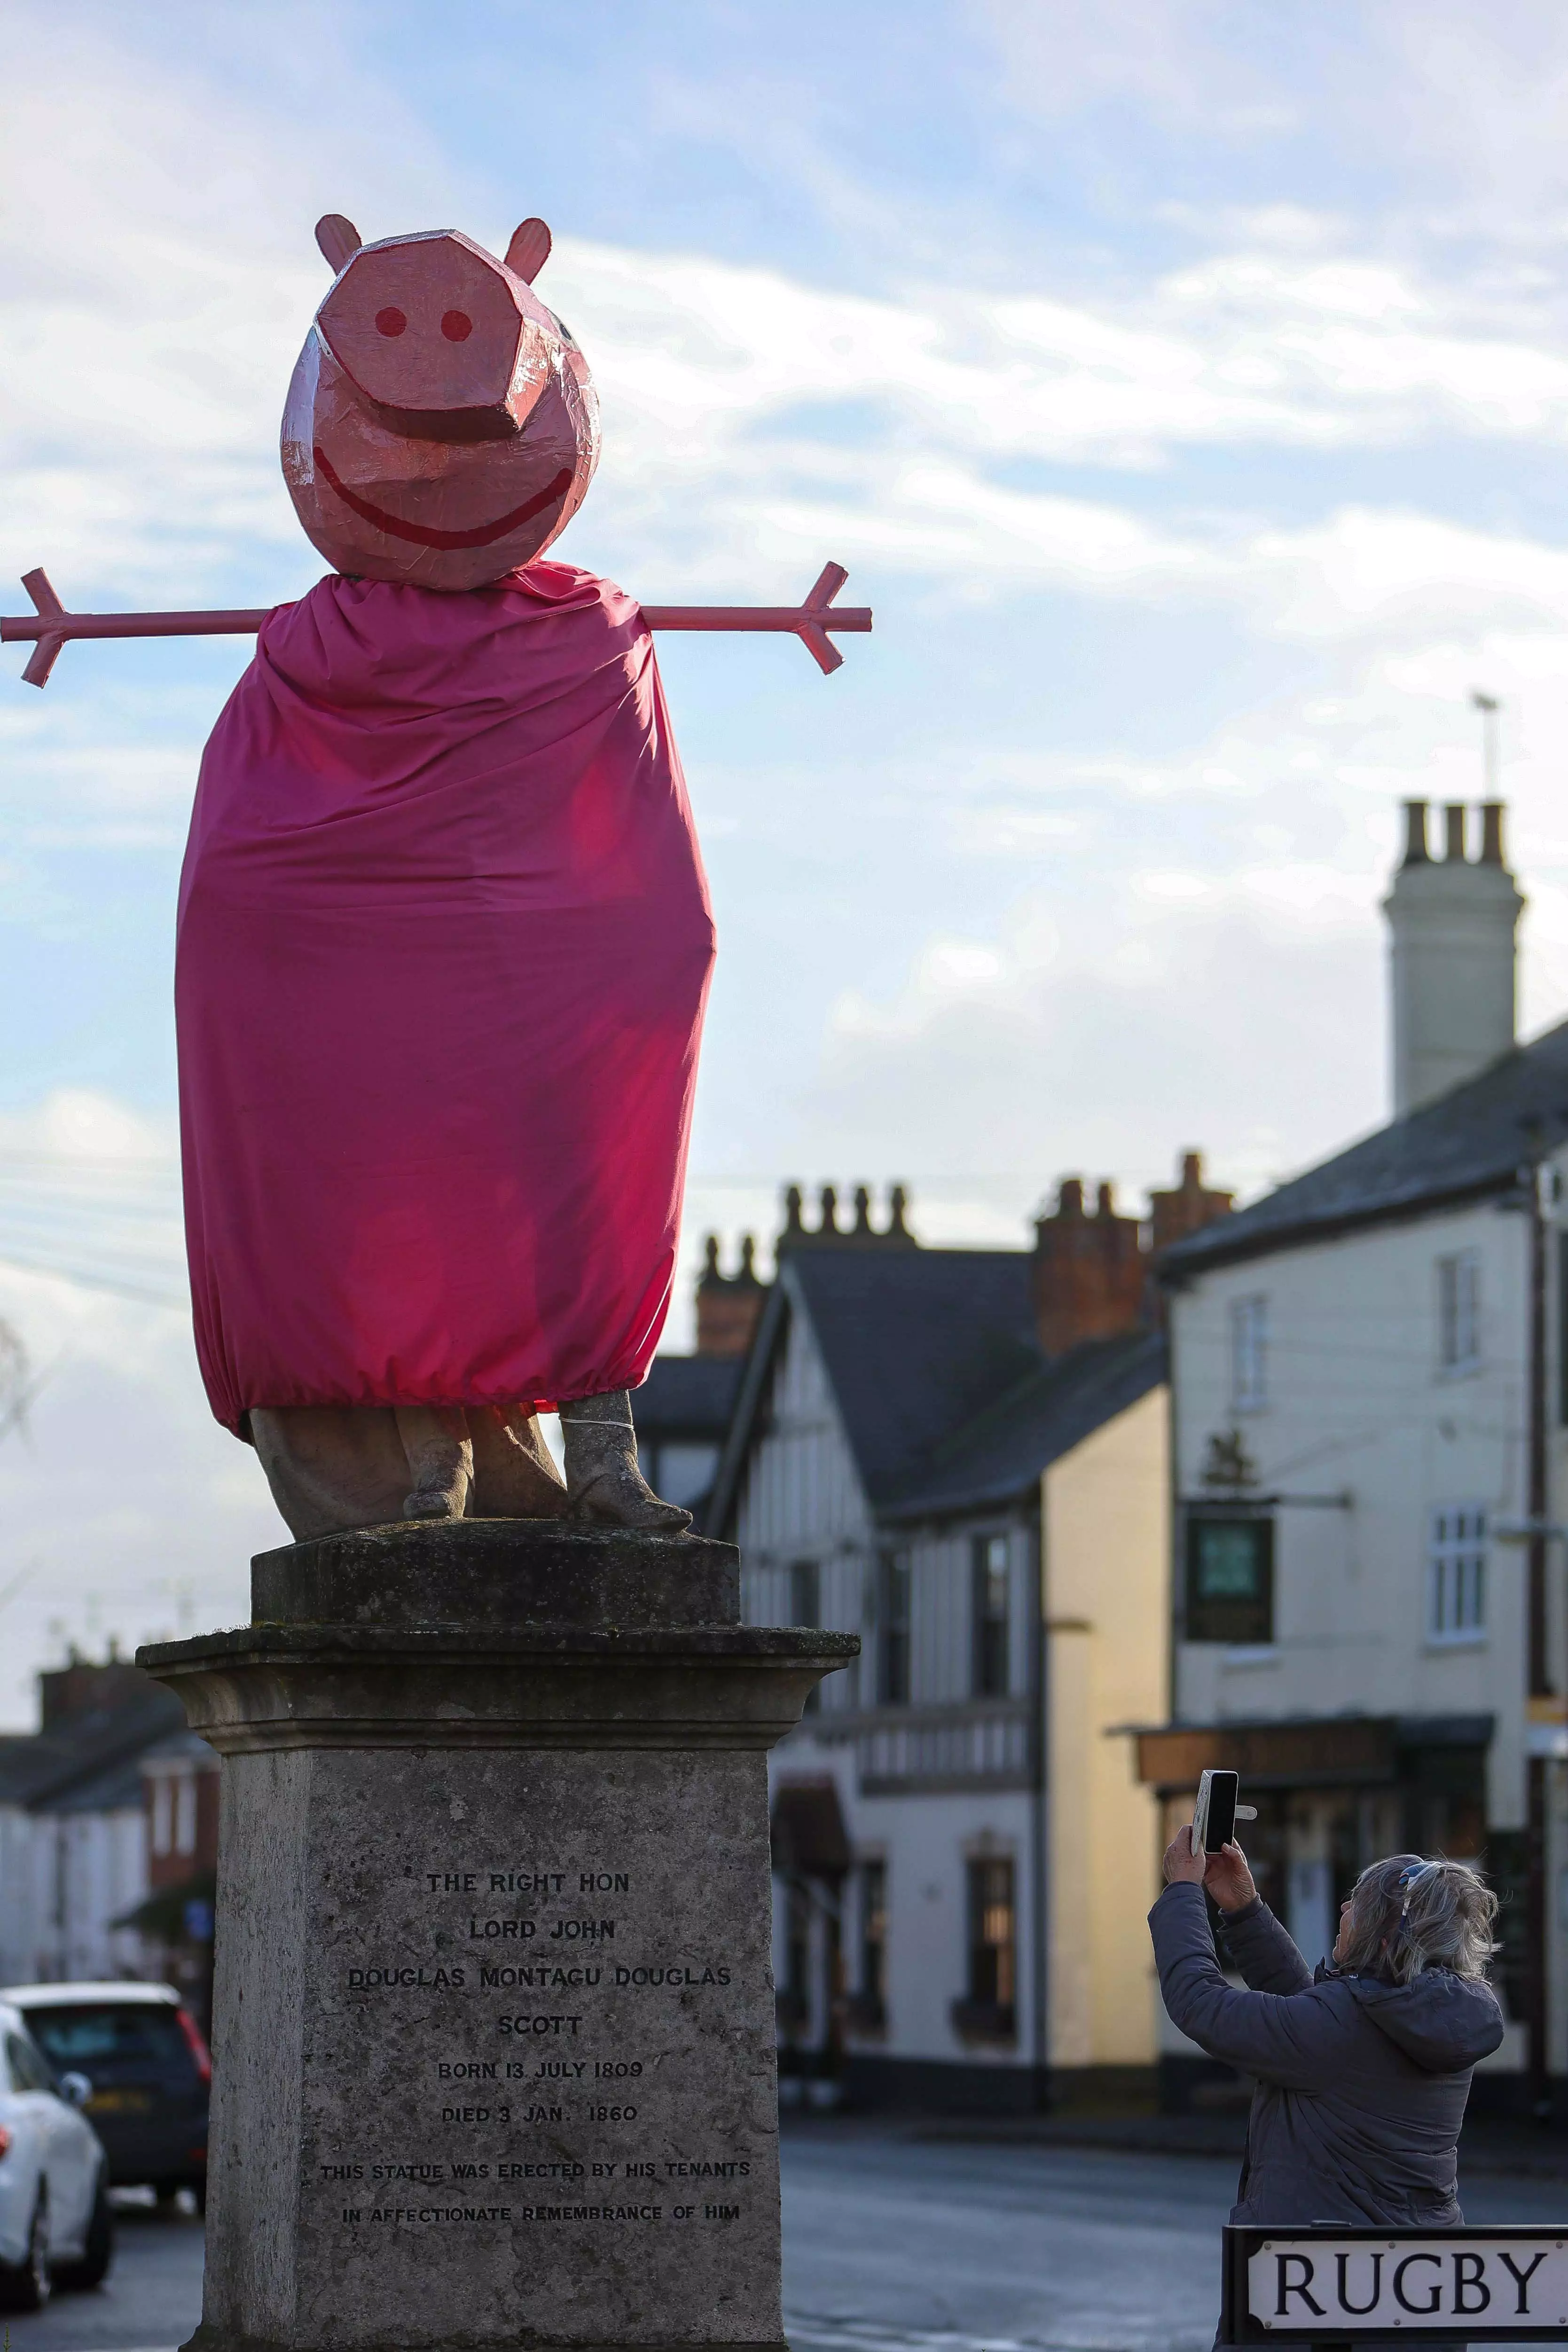 As an annual festive tradition, the commemorative statue has a fancy dress overhaul each year (